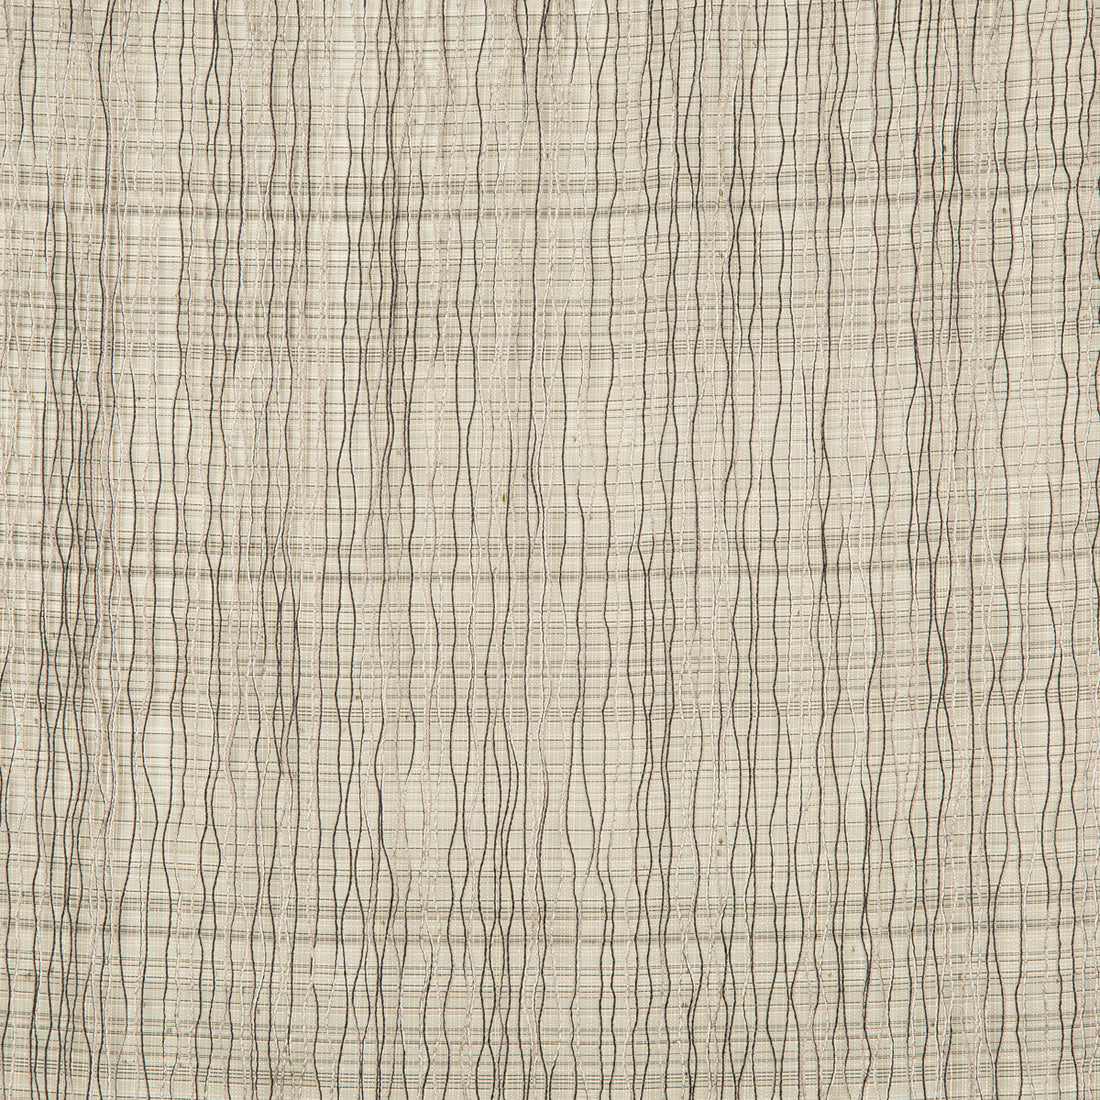 Adore fabric in starlite color - pattern 4775.816.0 - by Kravet Contract in the Kravet Cruise collection